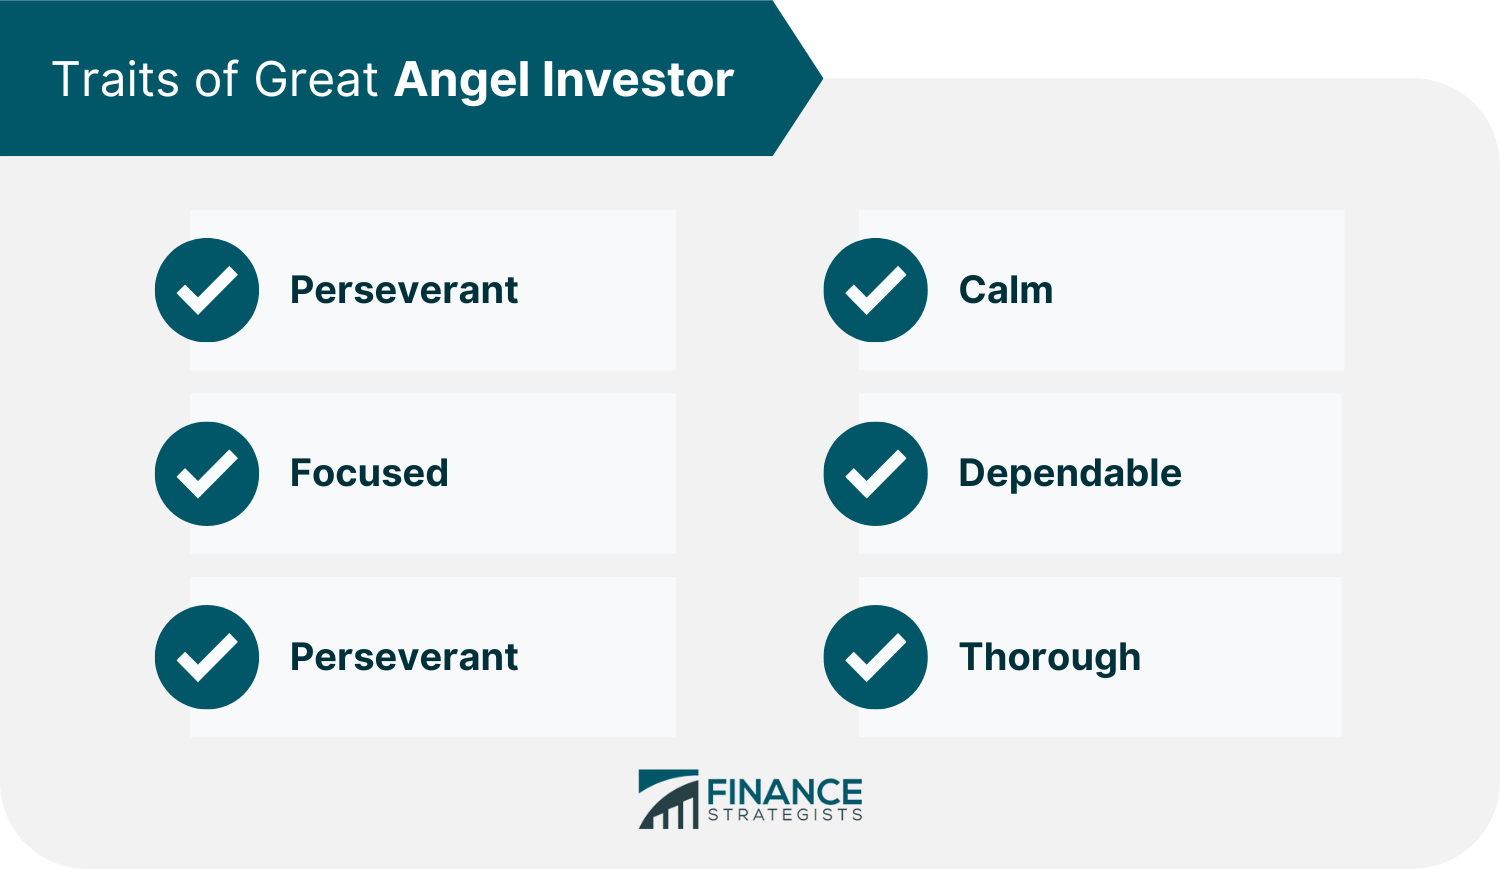 Traits of Great Angel Investor